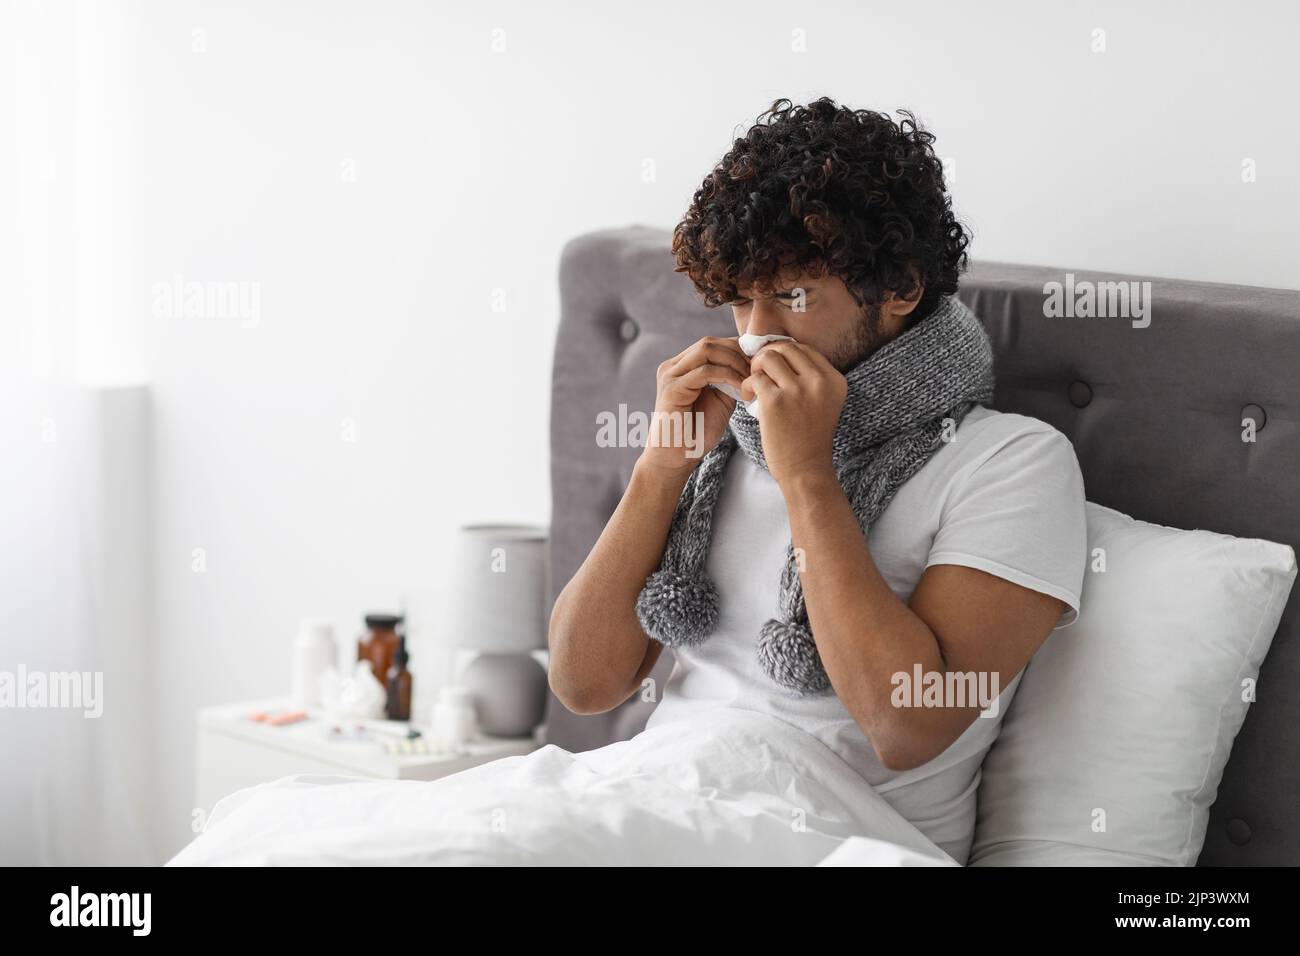 Sick eastern guy staying in bed, sneezing nose Stock Photo